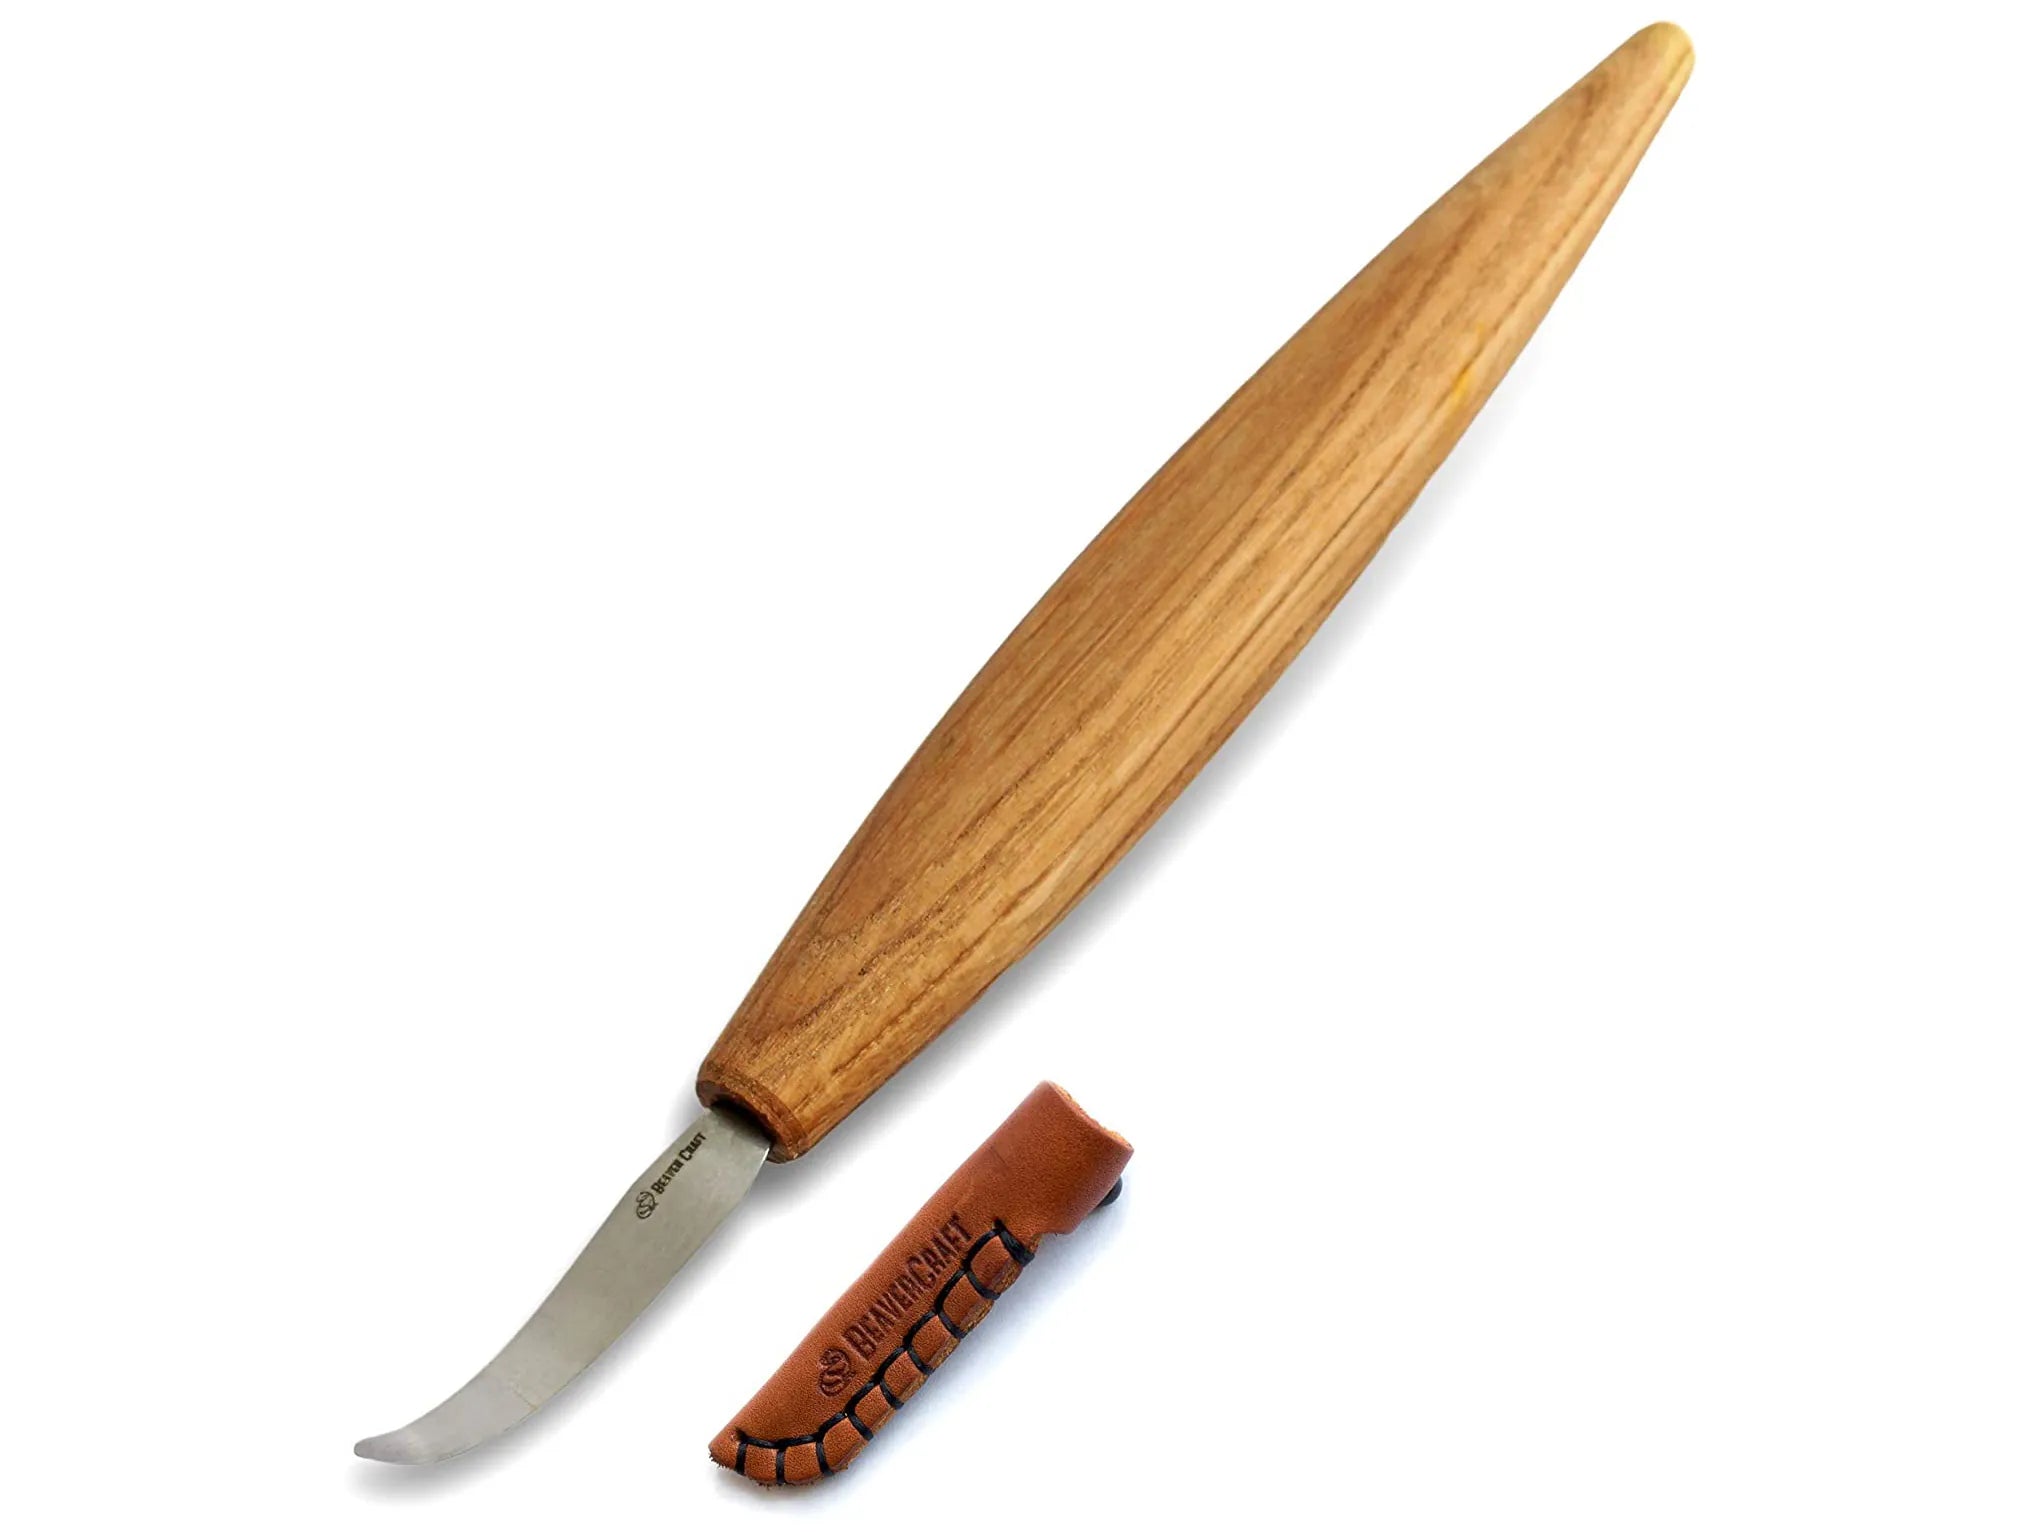 BeaverCraft Wood Carving Hook Knife SK1 Wood Carving Whittling Knife C17P  Carving Spoons Kuksa Bowls and Cups Spoon Carving Tools